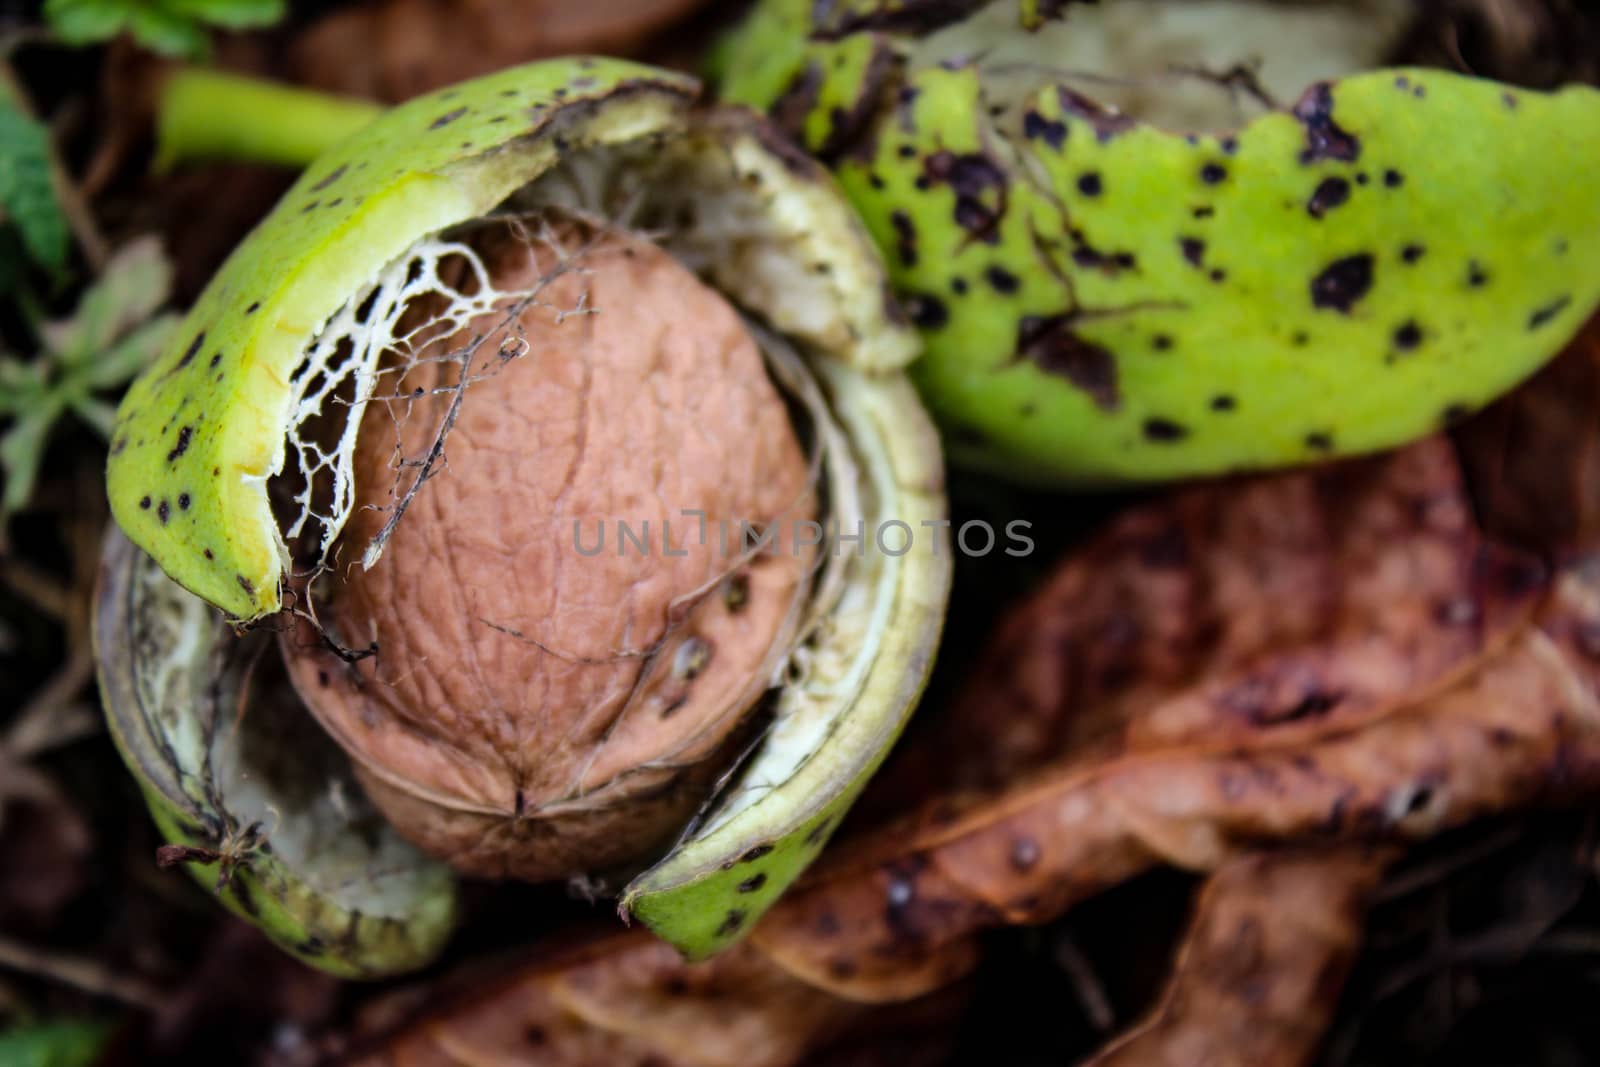 A ripe walnut with an open shell fell to the ground among the dried leaves. by mahirrov